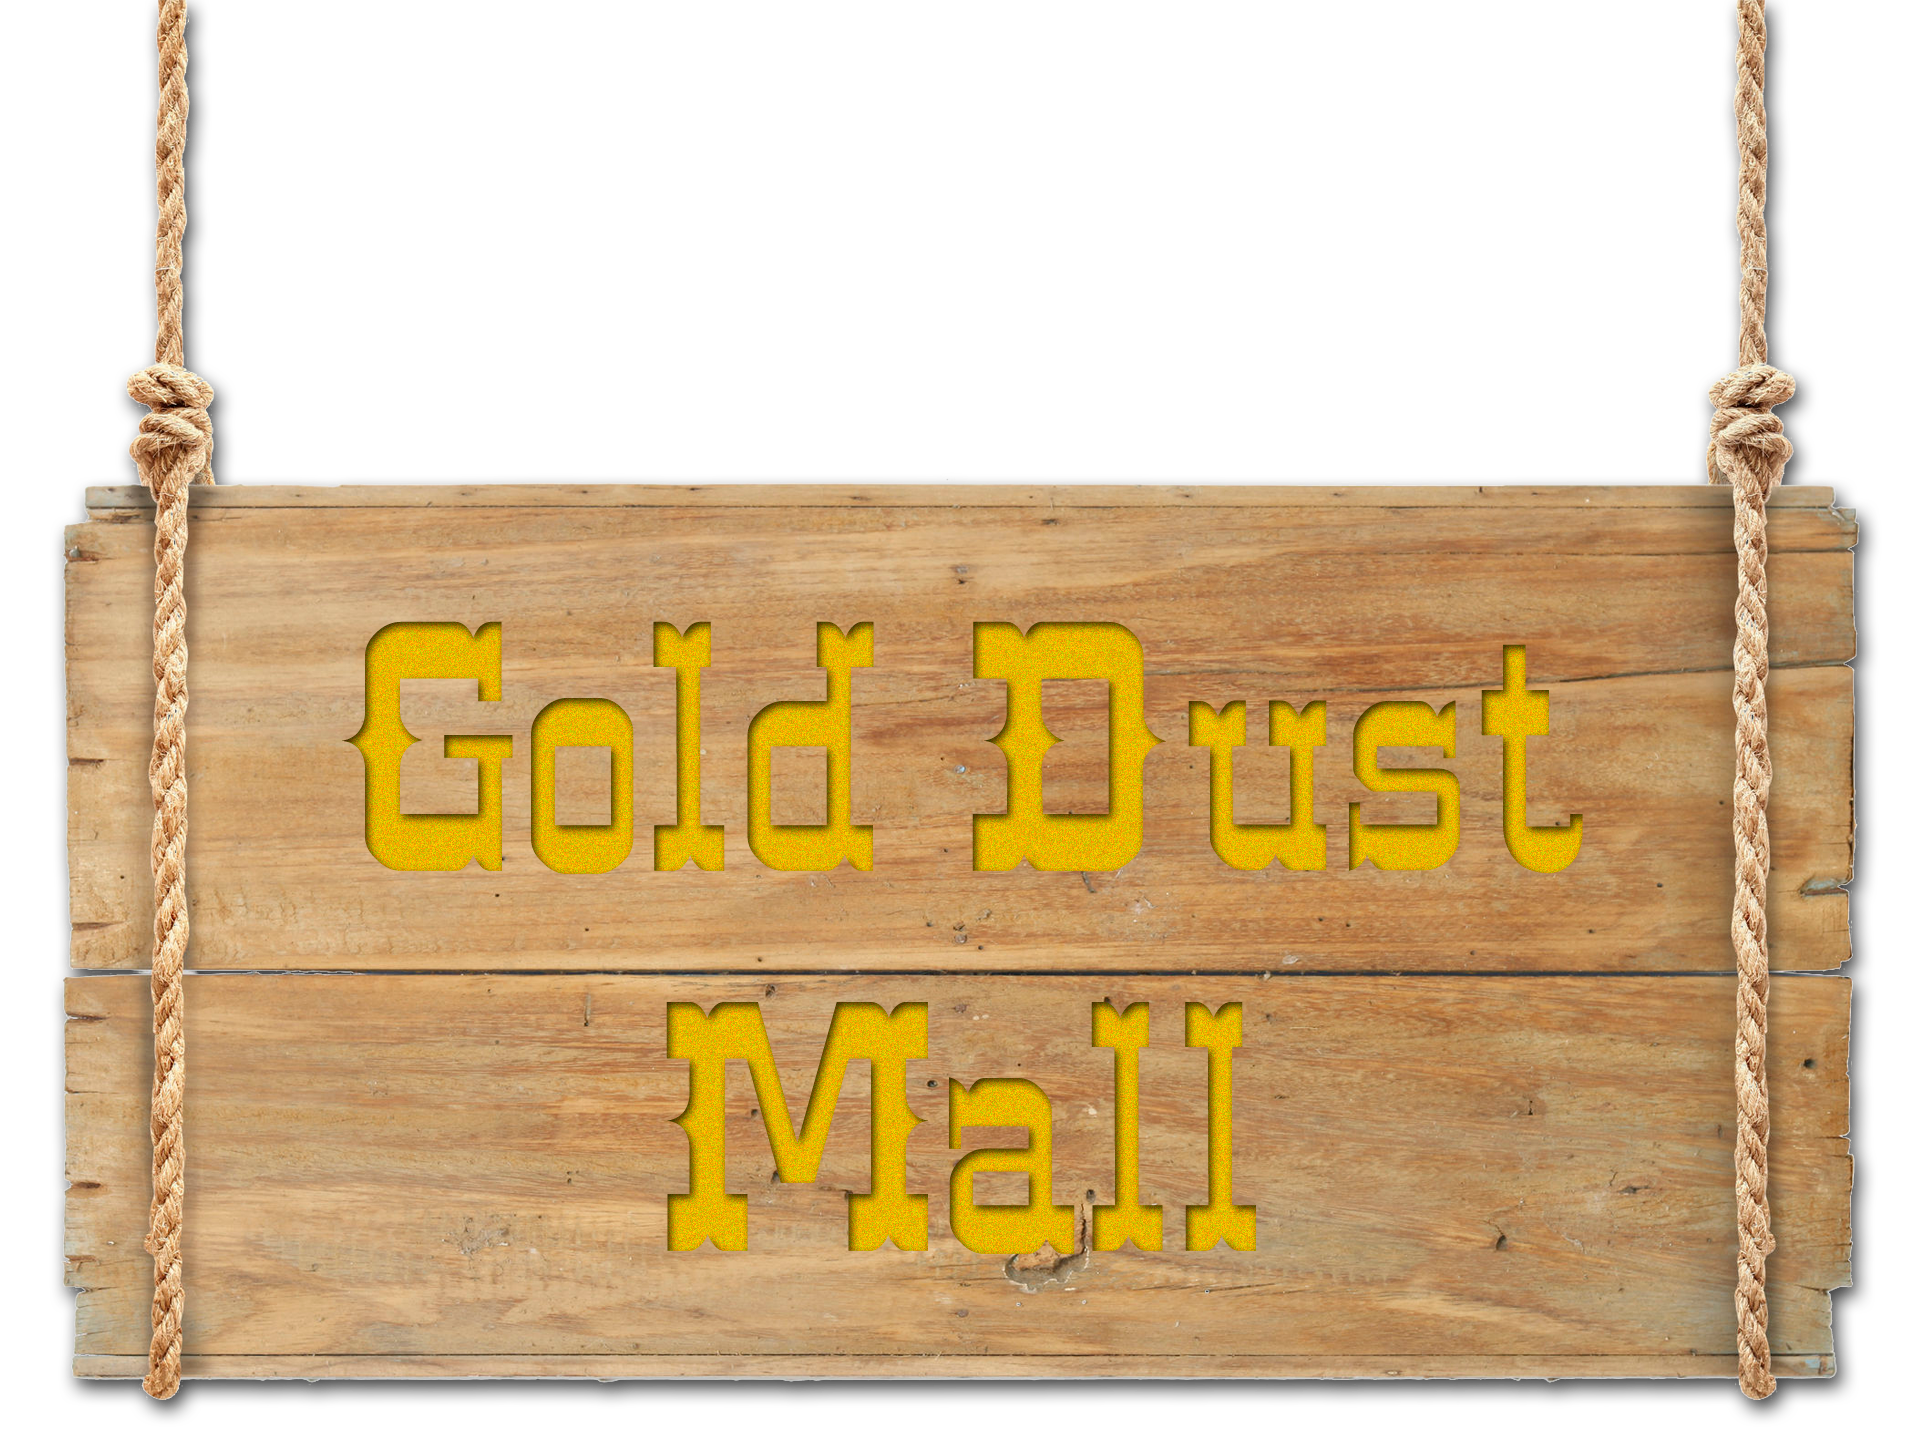 Gold Dust Mall